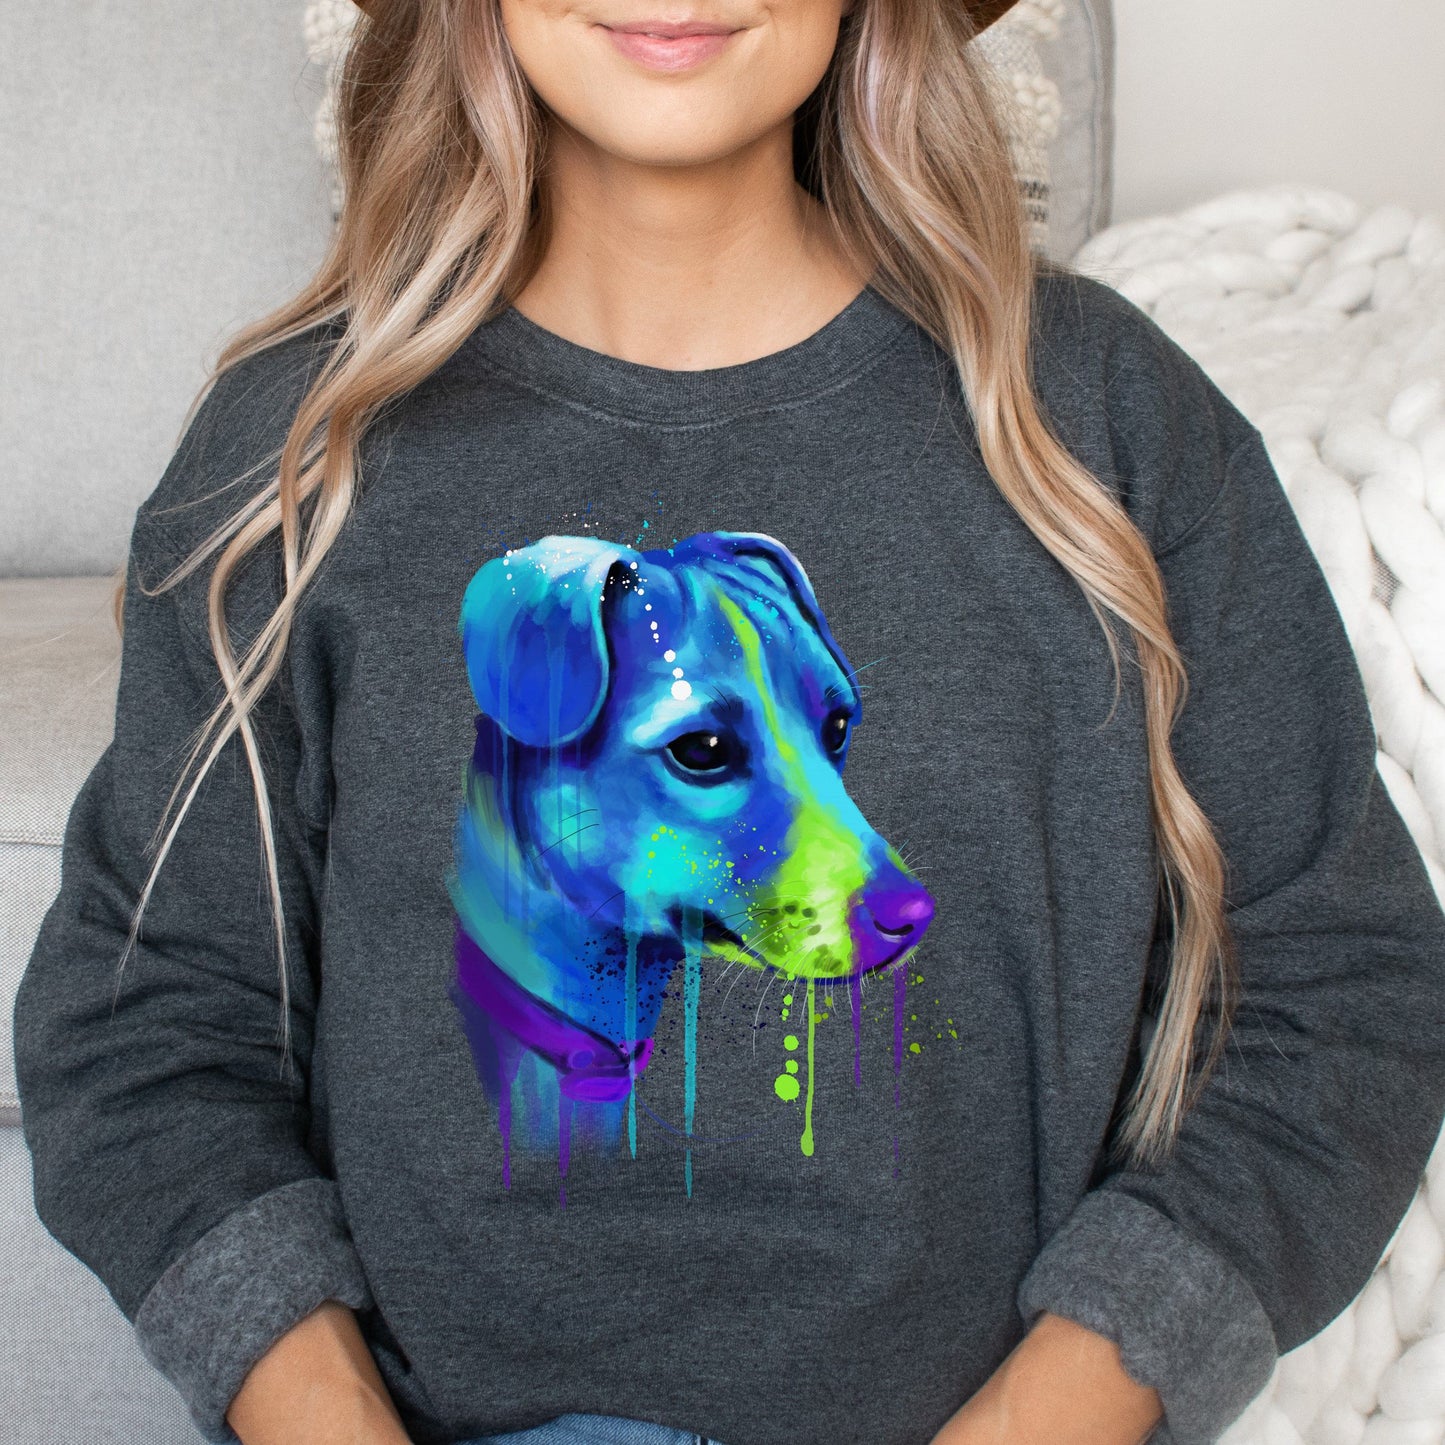 Abstract Jack Russell dog Unisex Crewneck Sweatshirt with expressive splashes-Dark Heather-Family-Gift-Planet